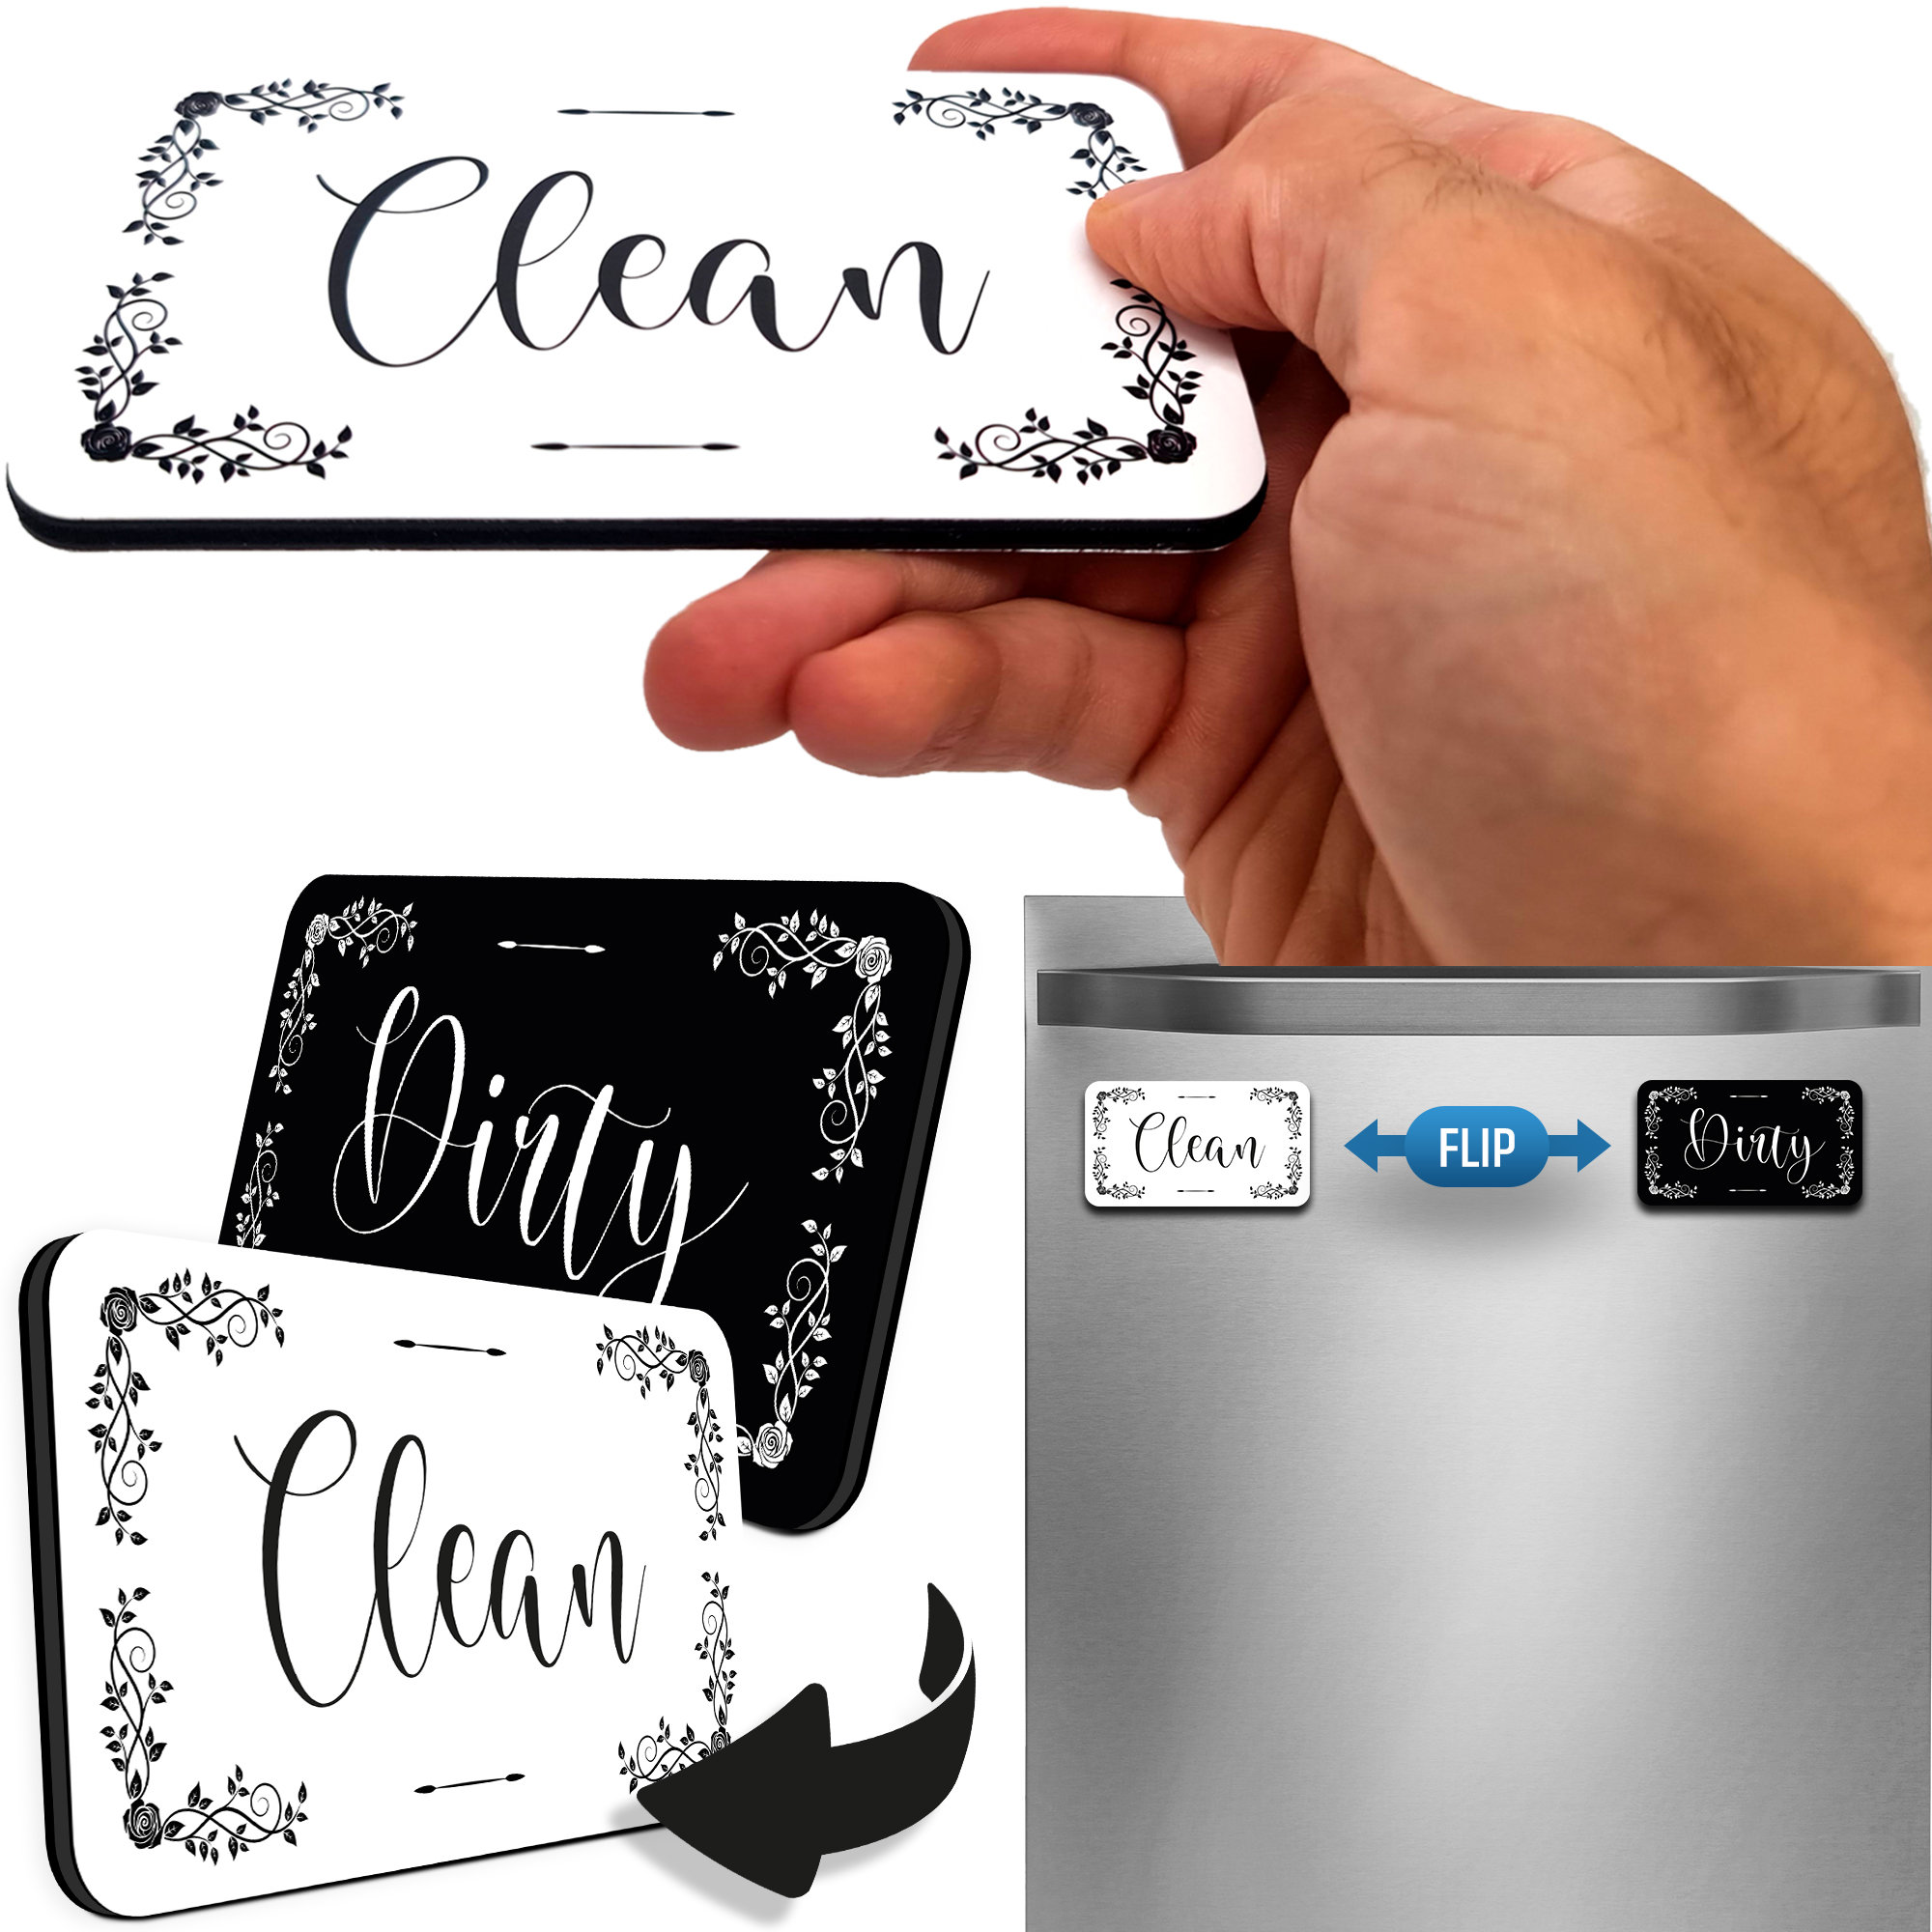 Dishwasher Magnet Clean Dirty Sign Indicator - 3.5 x 2.8 inches - Double  Sided with Bonus Magnetic Plate - Clean Dirty Magnet for Dishwasher